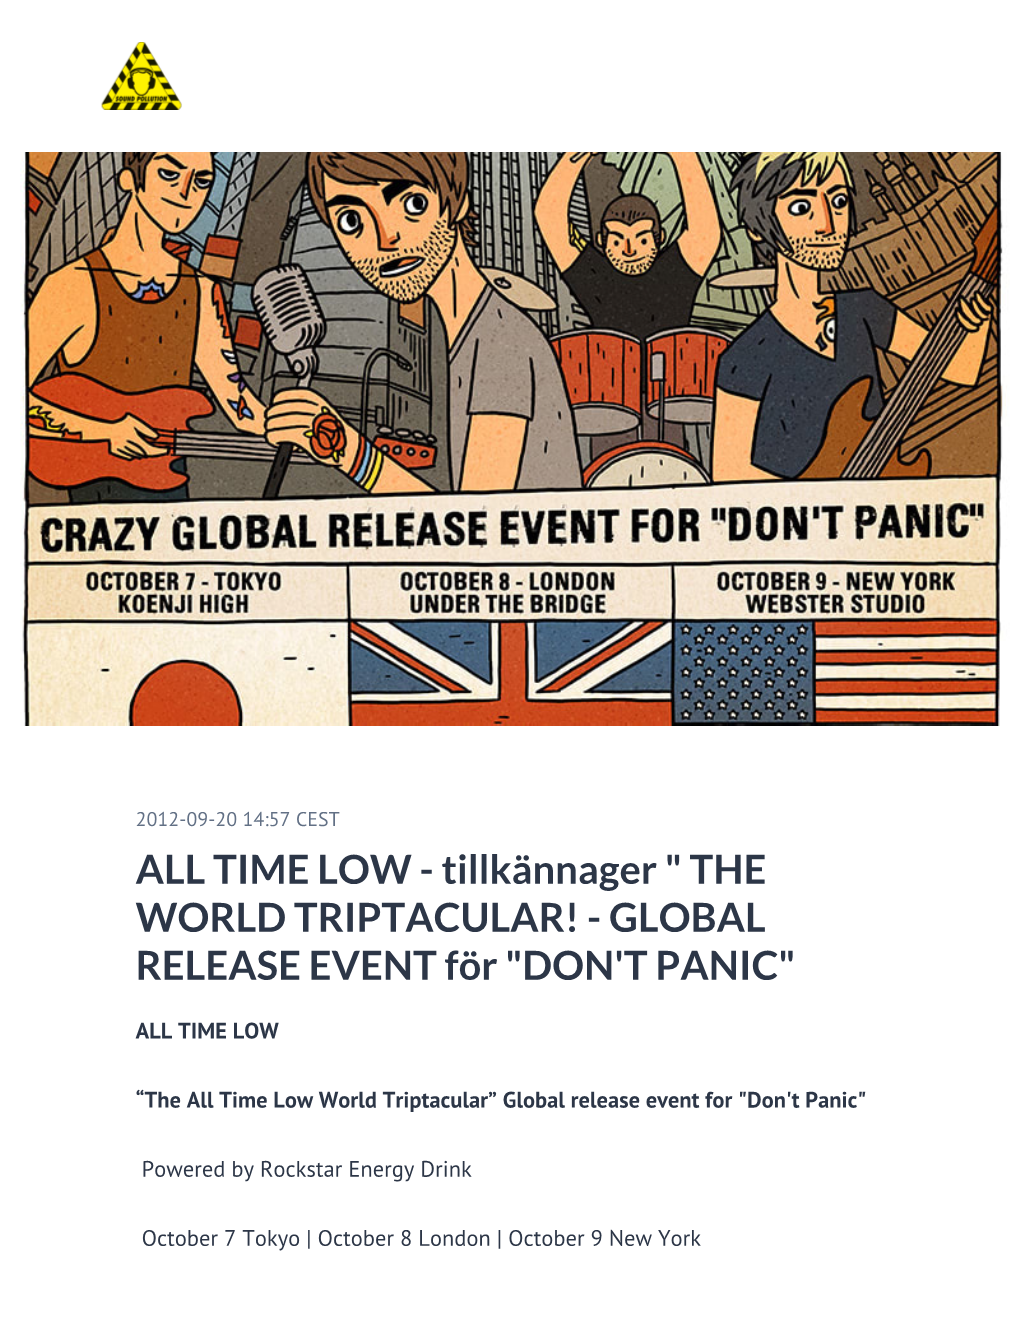 THE WORLD TRIPTACULAR! - GLOBAL RELEASE EVENT För "DON't PANIC"